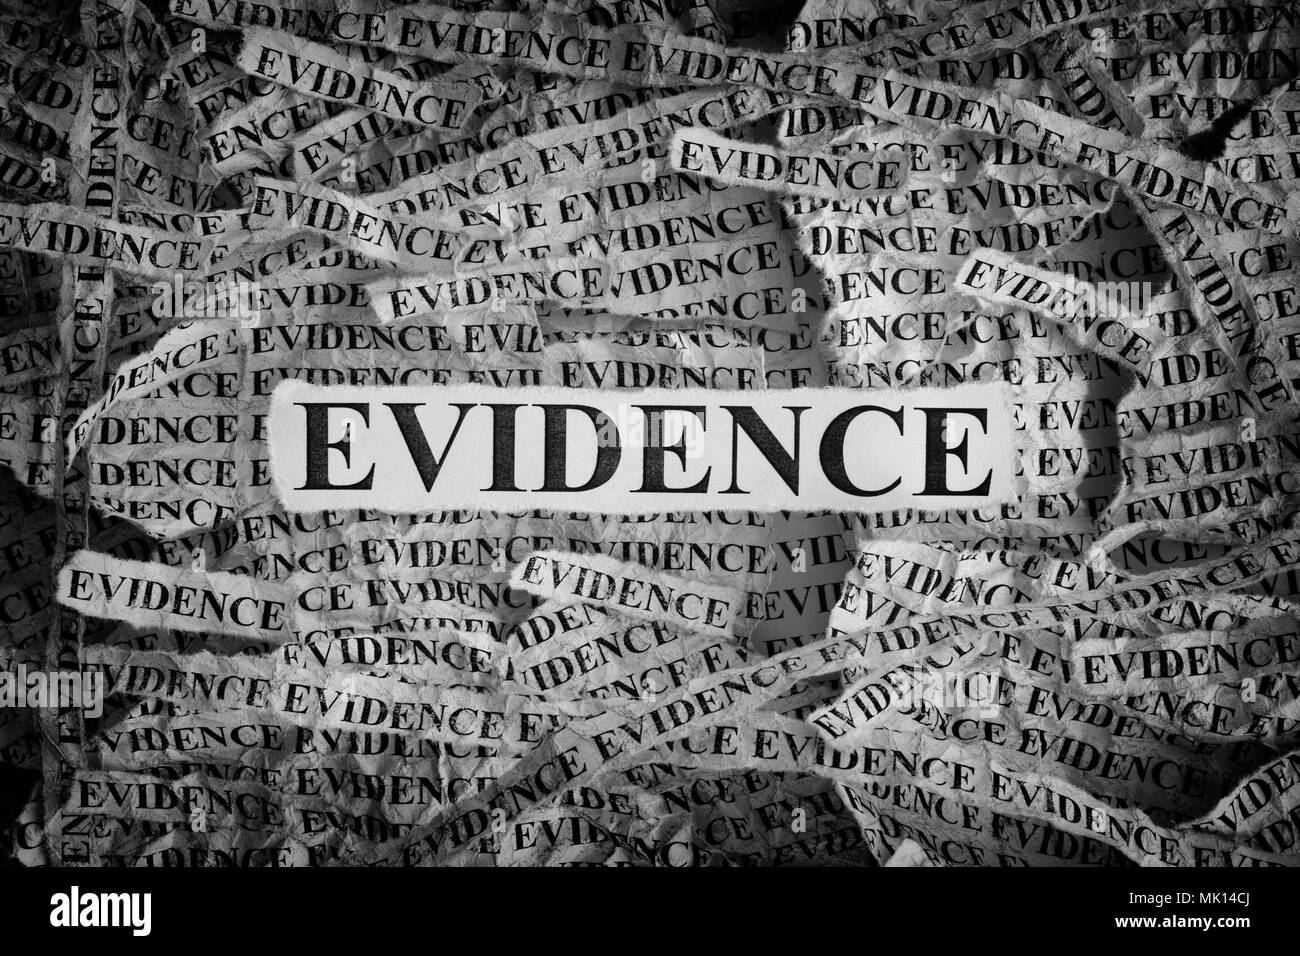 Evidence. Torn pieces of paper with the words Evidence. Concept Image. Black and White. Closeup. Stock Photo